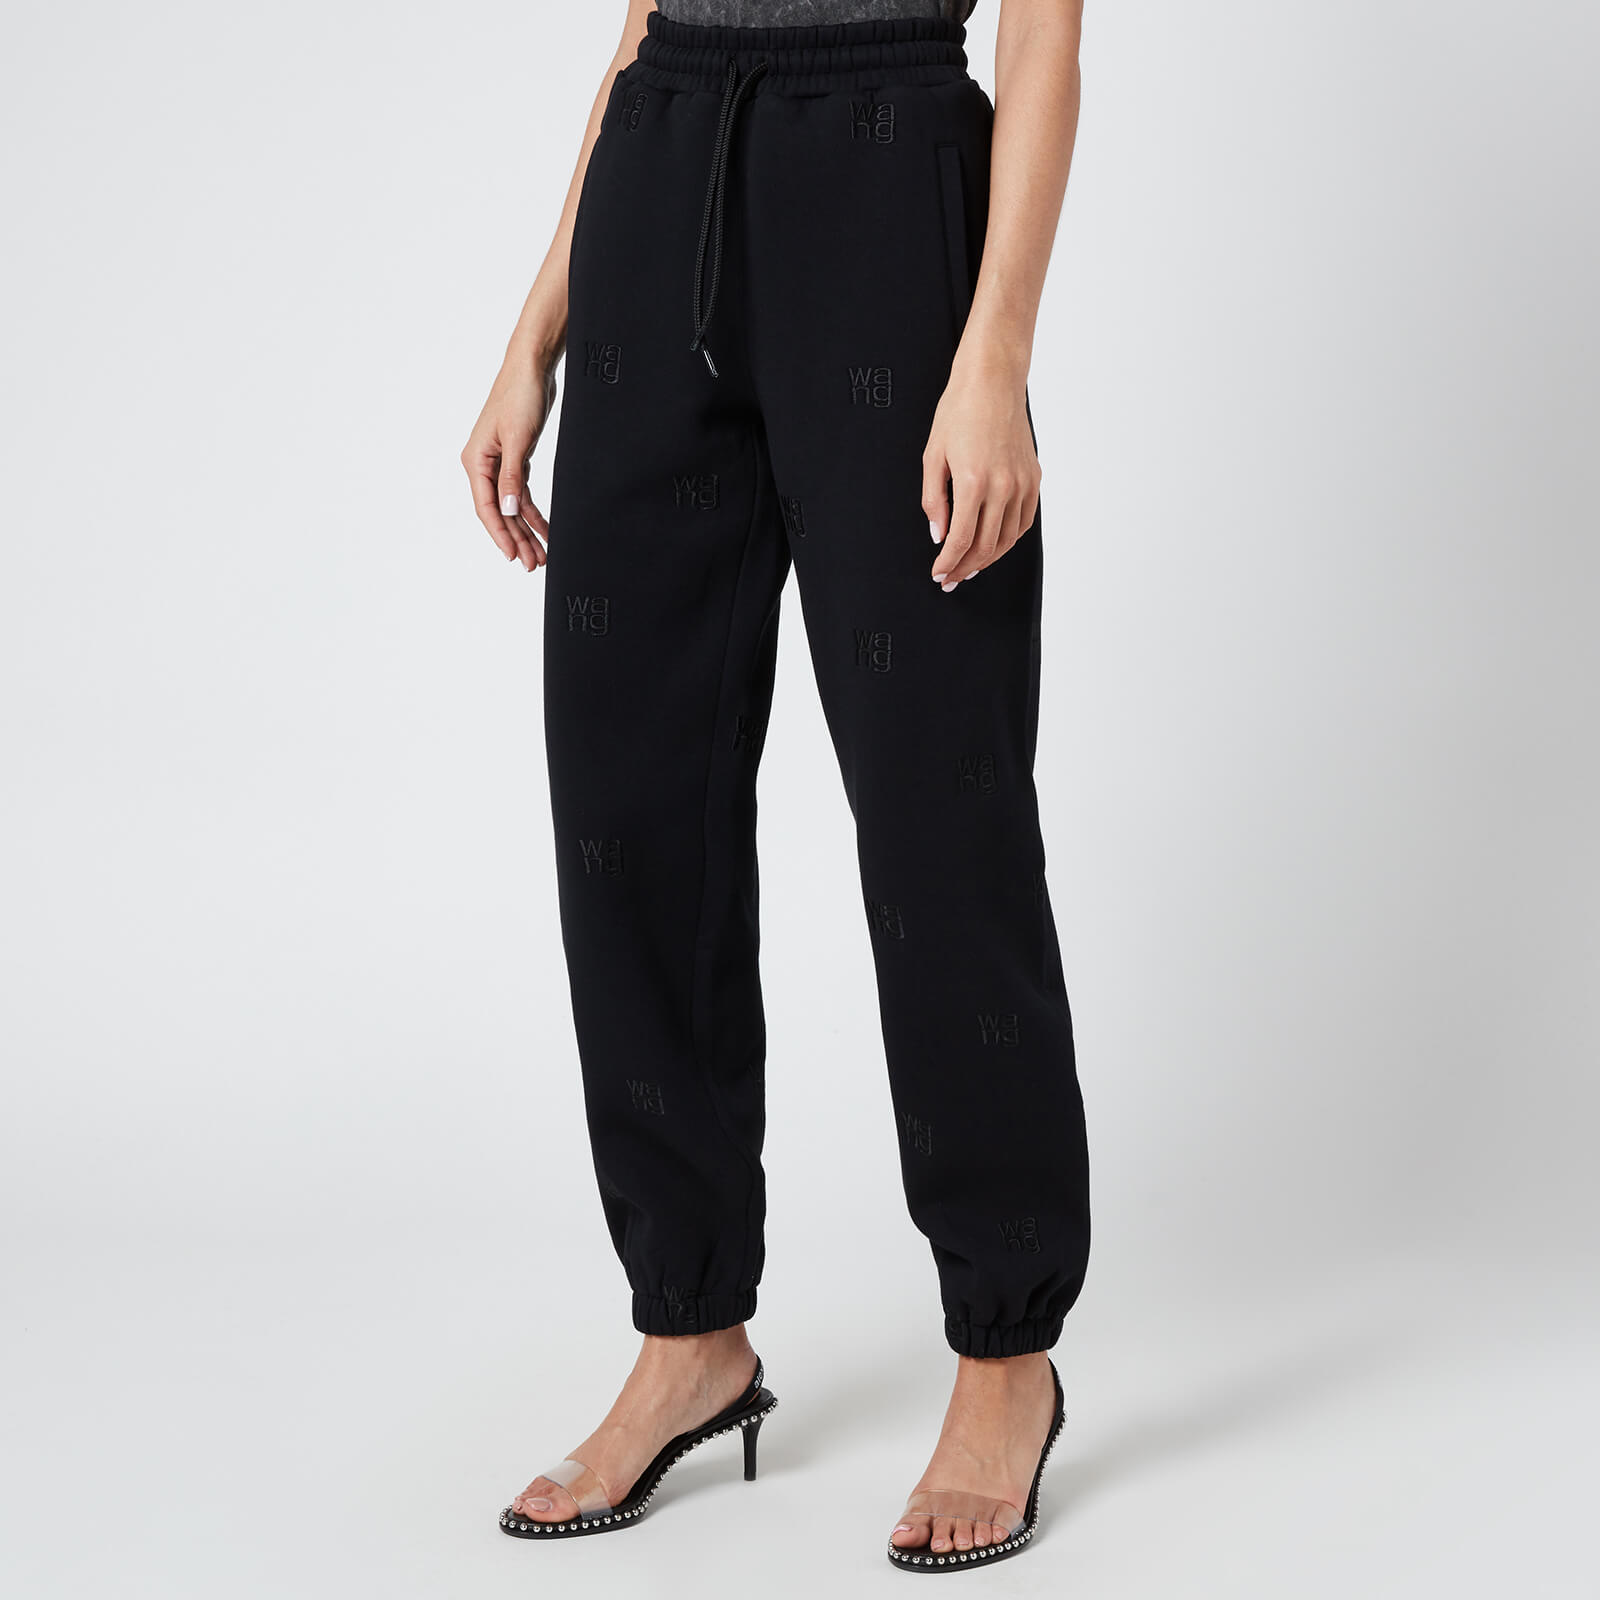 Alexander Wang Women's Jogger with Allover Embroidery - Black  - S